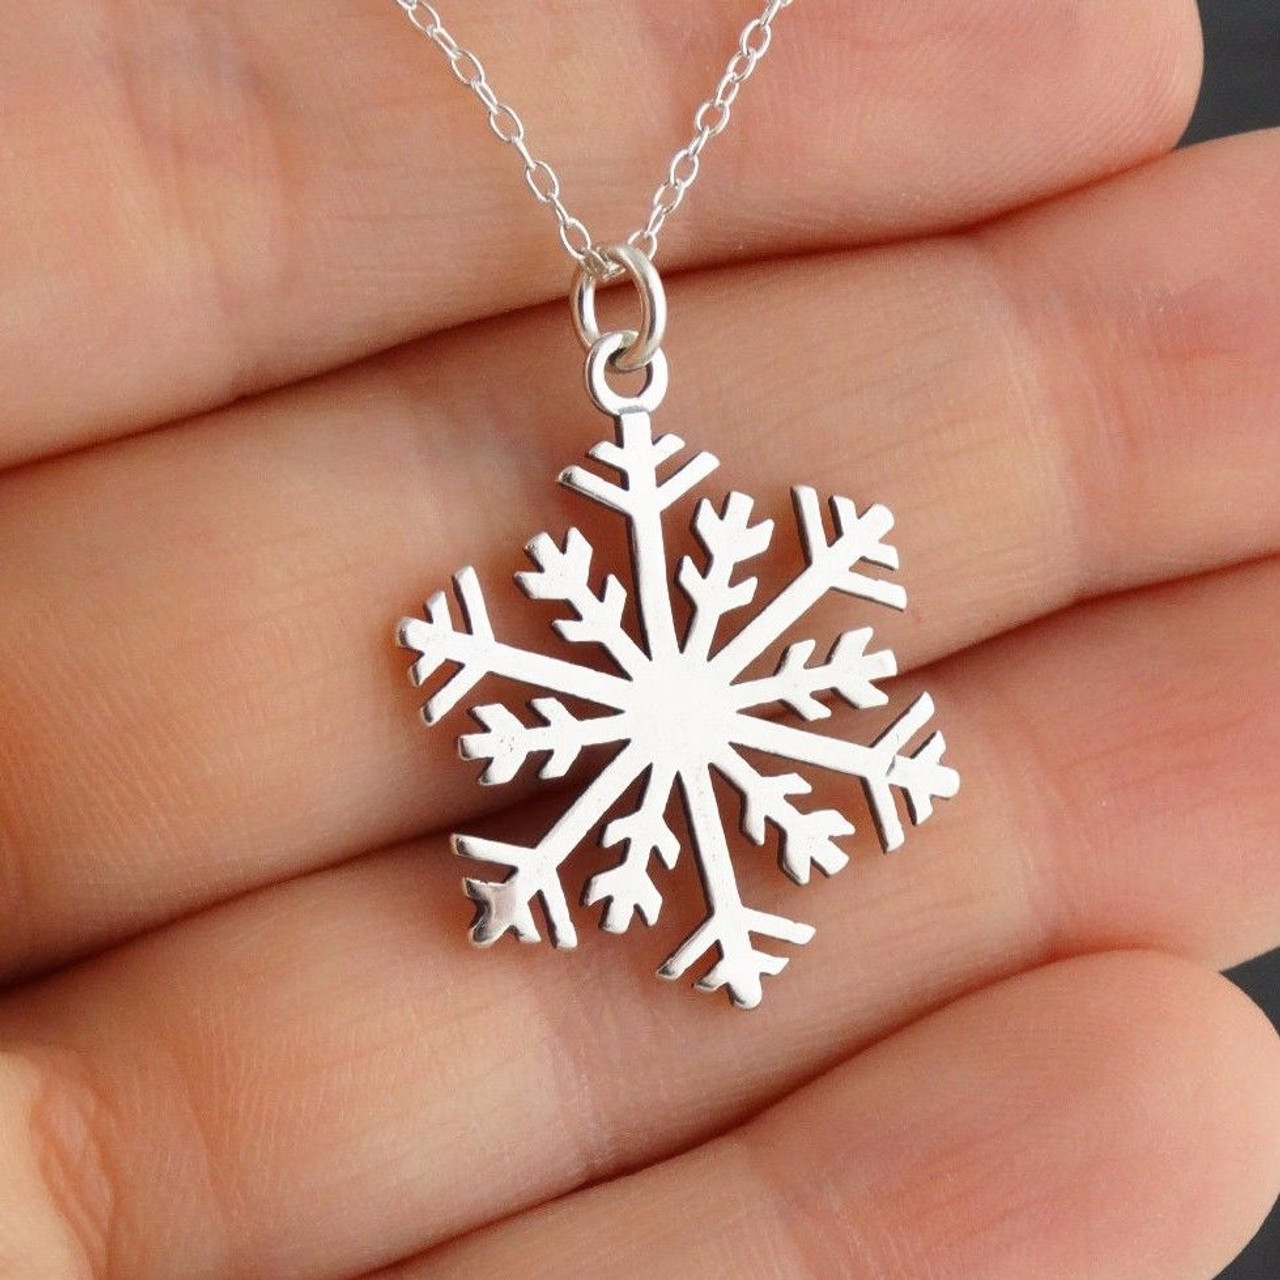 Snowflake Pendant Necklace - 925 Sterling Silver - FashionJunkie4Life